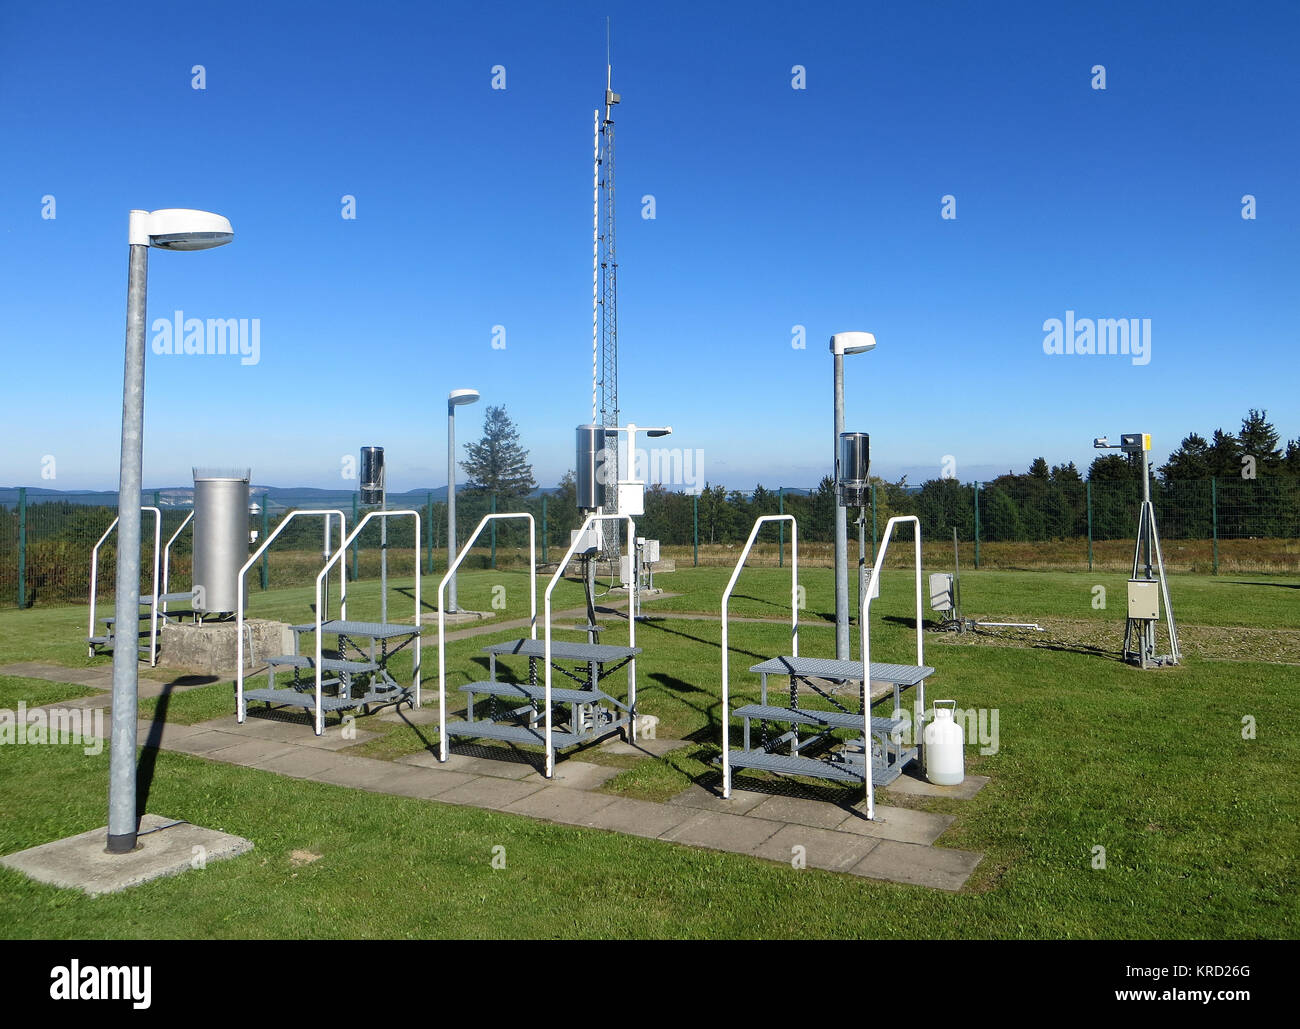 Messstation High Resolution Stock Photography and Images - Alamy